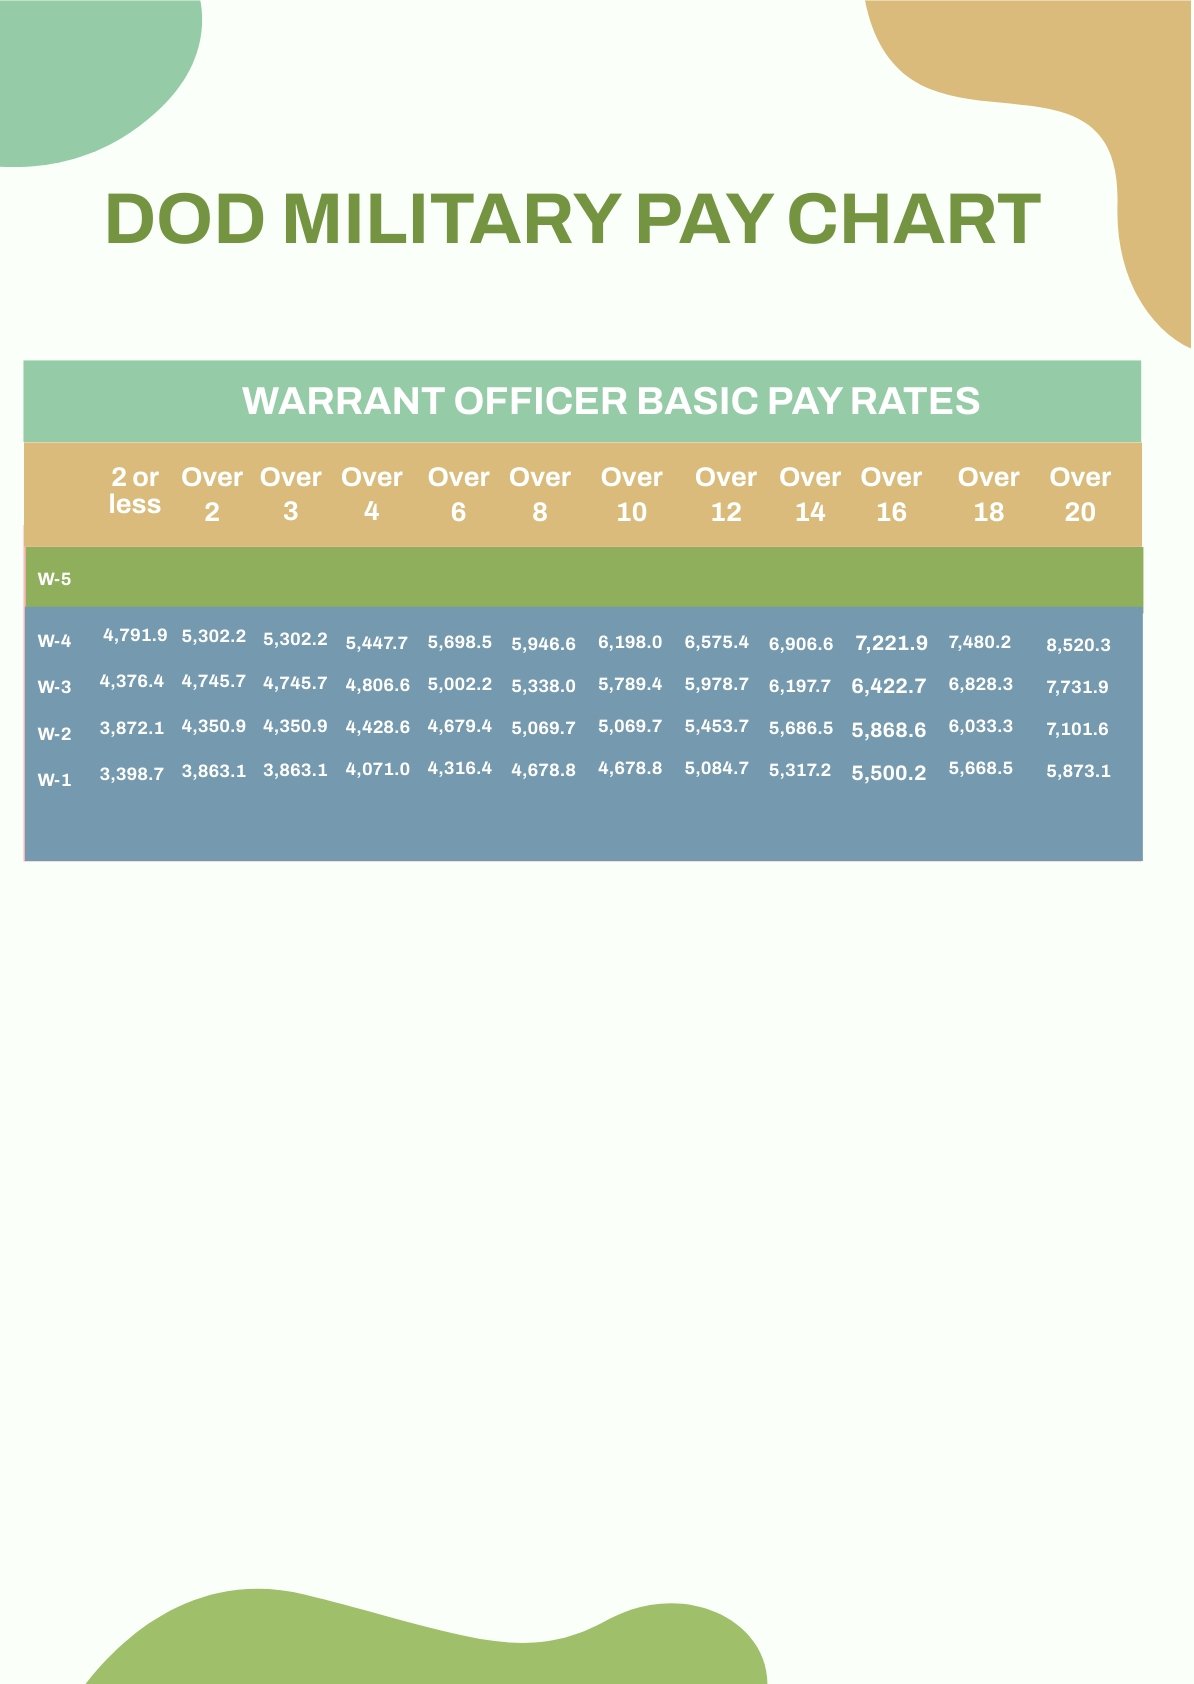 Free Dod Military Pay Chart in PSD